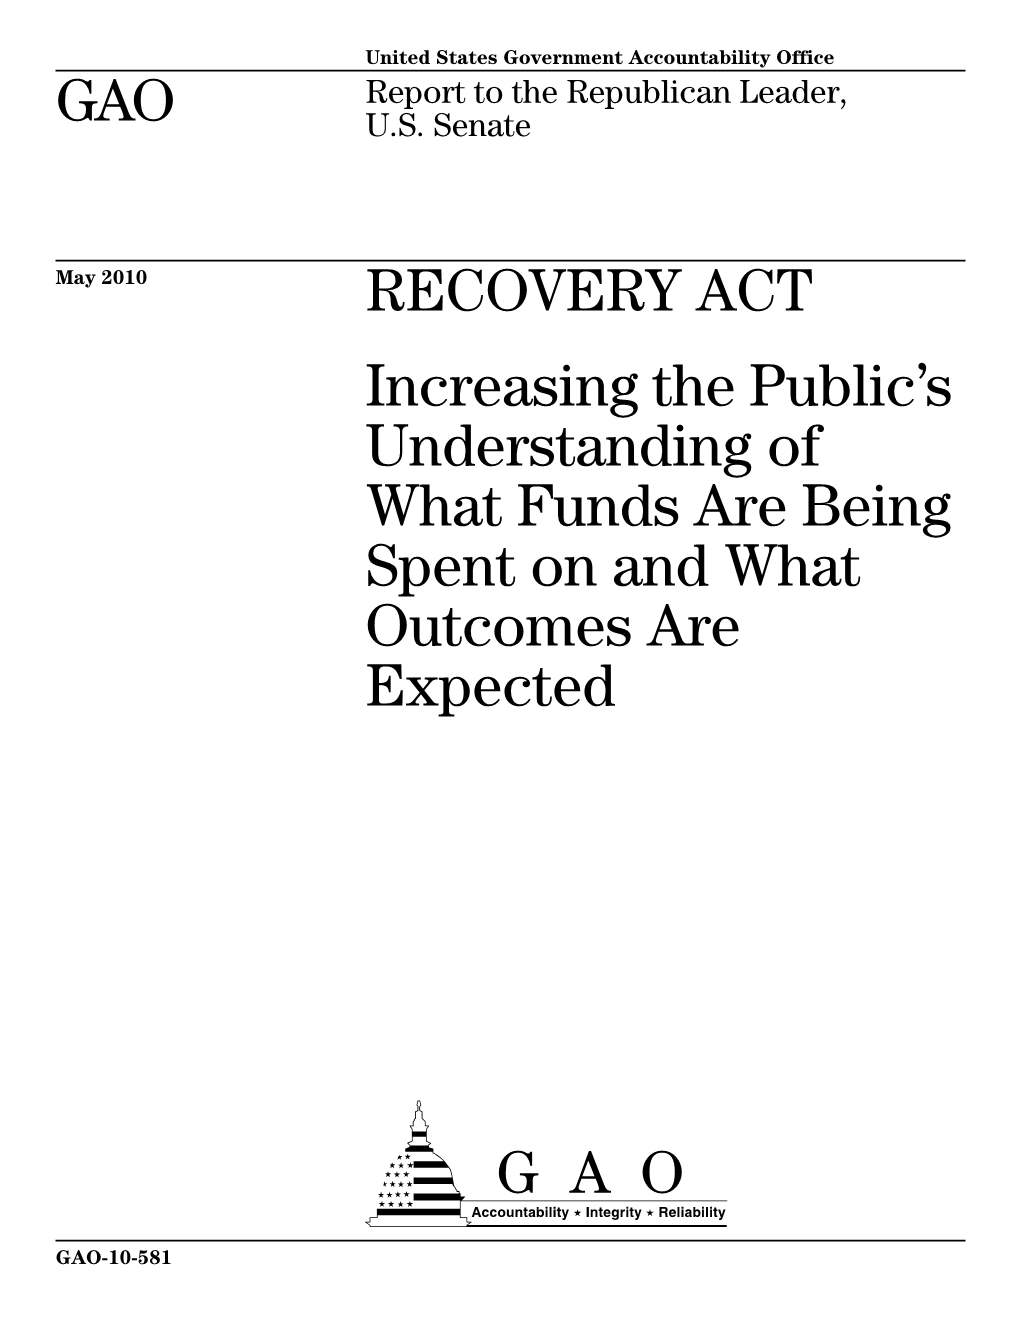 GAO-10-581 Recovery Act: Increasing the Public's Understanding of What Funds Are Being Spent on and What Outcomes Are Expect